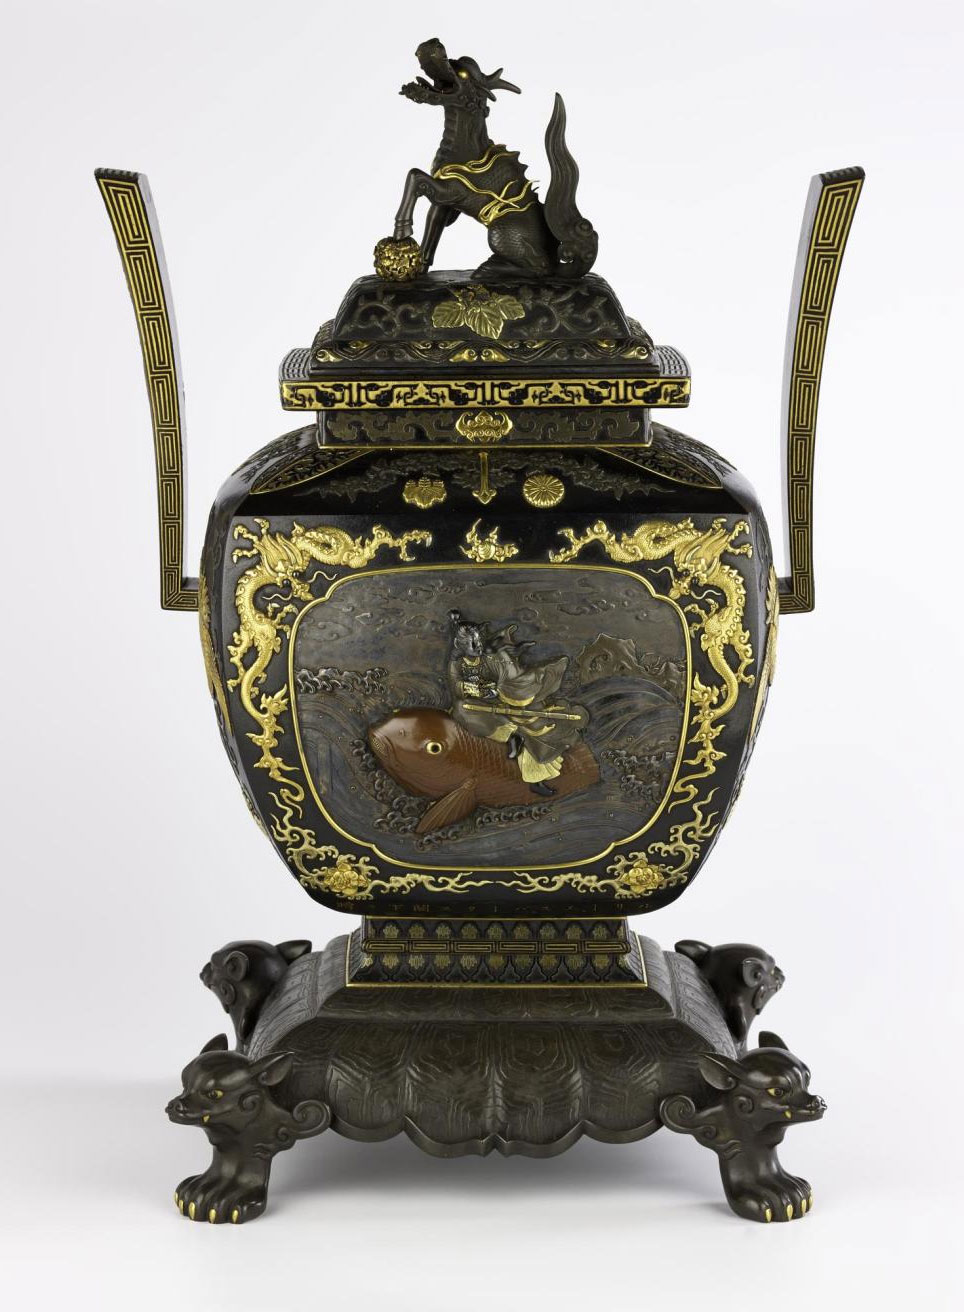 Incense burner and cover of bronze, ornamented with scenes from the tale of Urashima Taro, presented to Sir Harry Parkes by the Meiji Emperor in July 1883: Japan, by Suzuki Katsushige, Ichiryu Juko, and eight others, 1883.